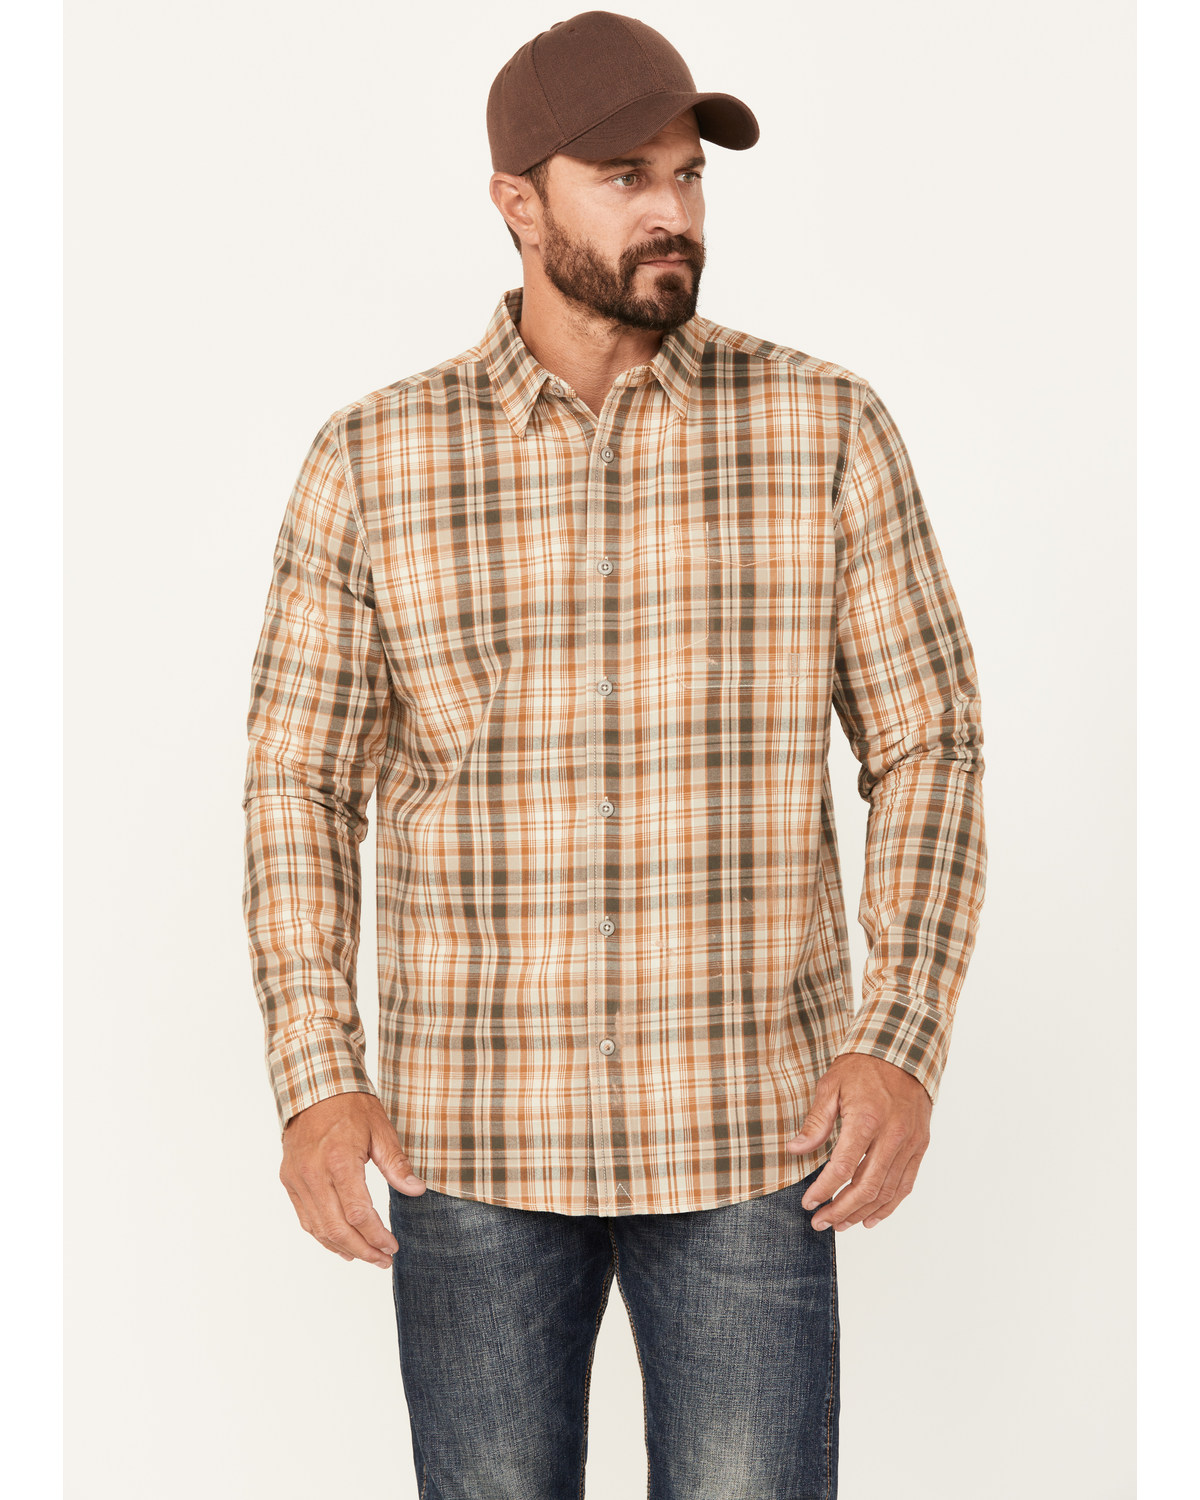 Brothers and Sons Men's Plaid Print Long Sleeve Button Down Western Shirt